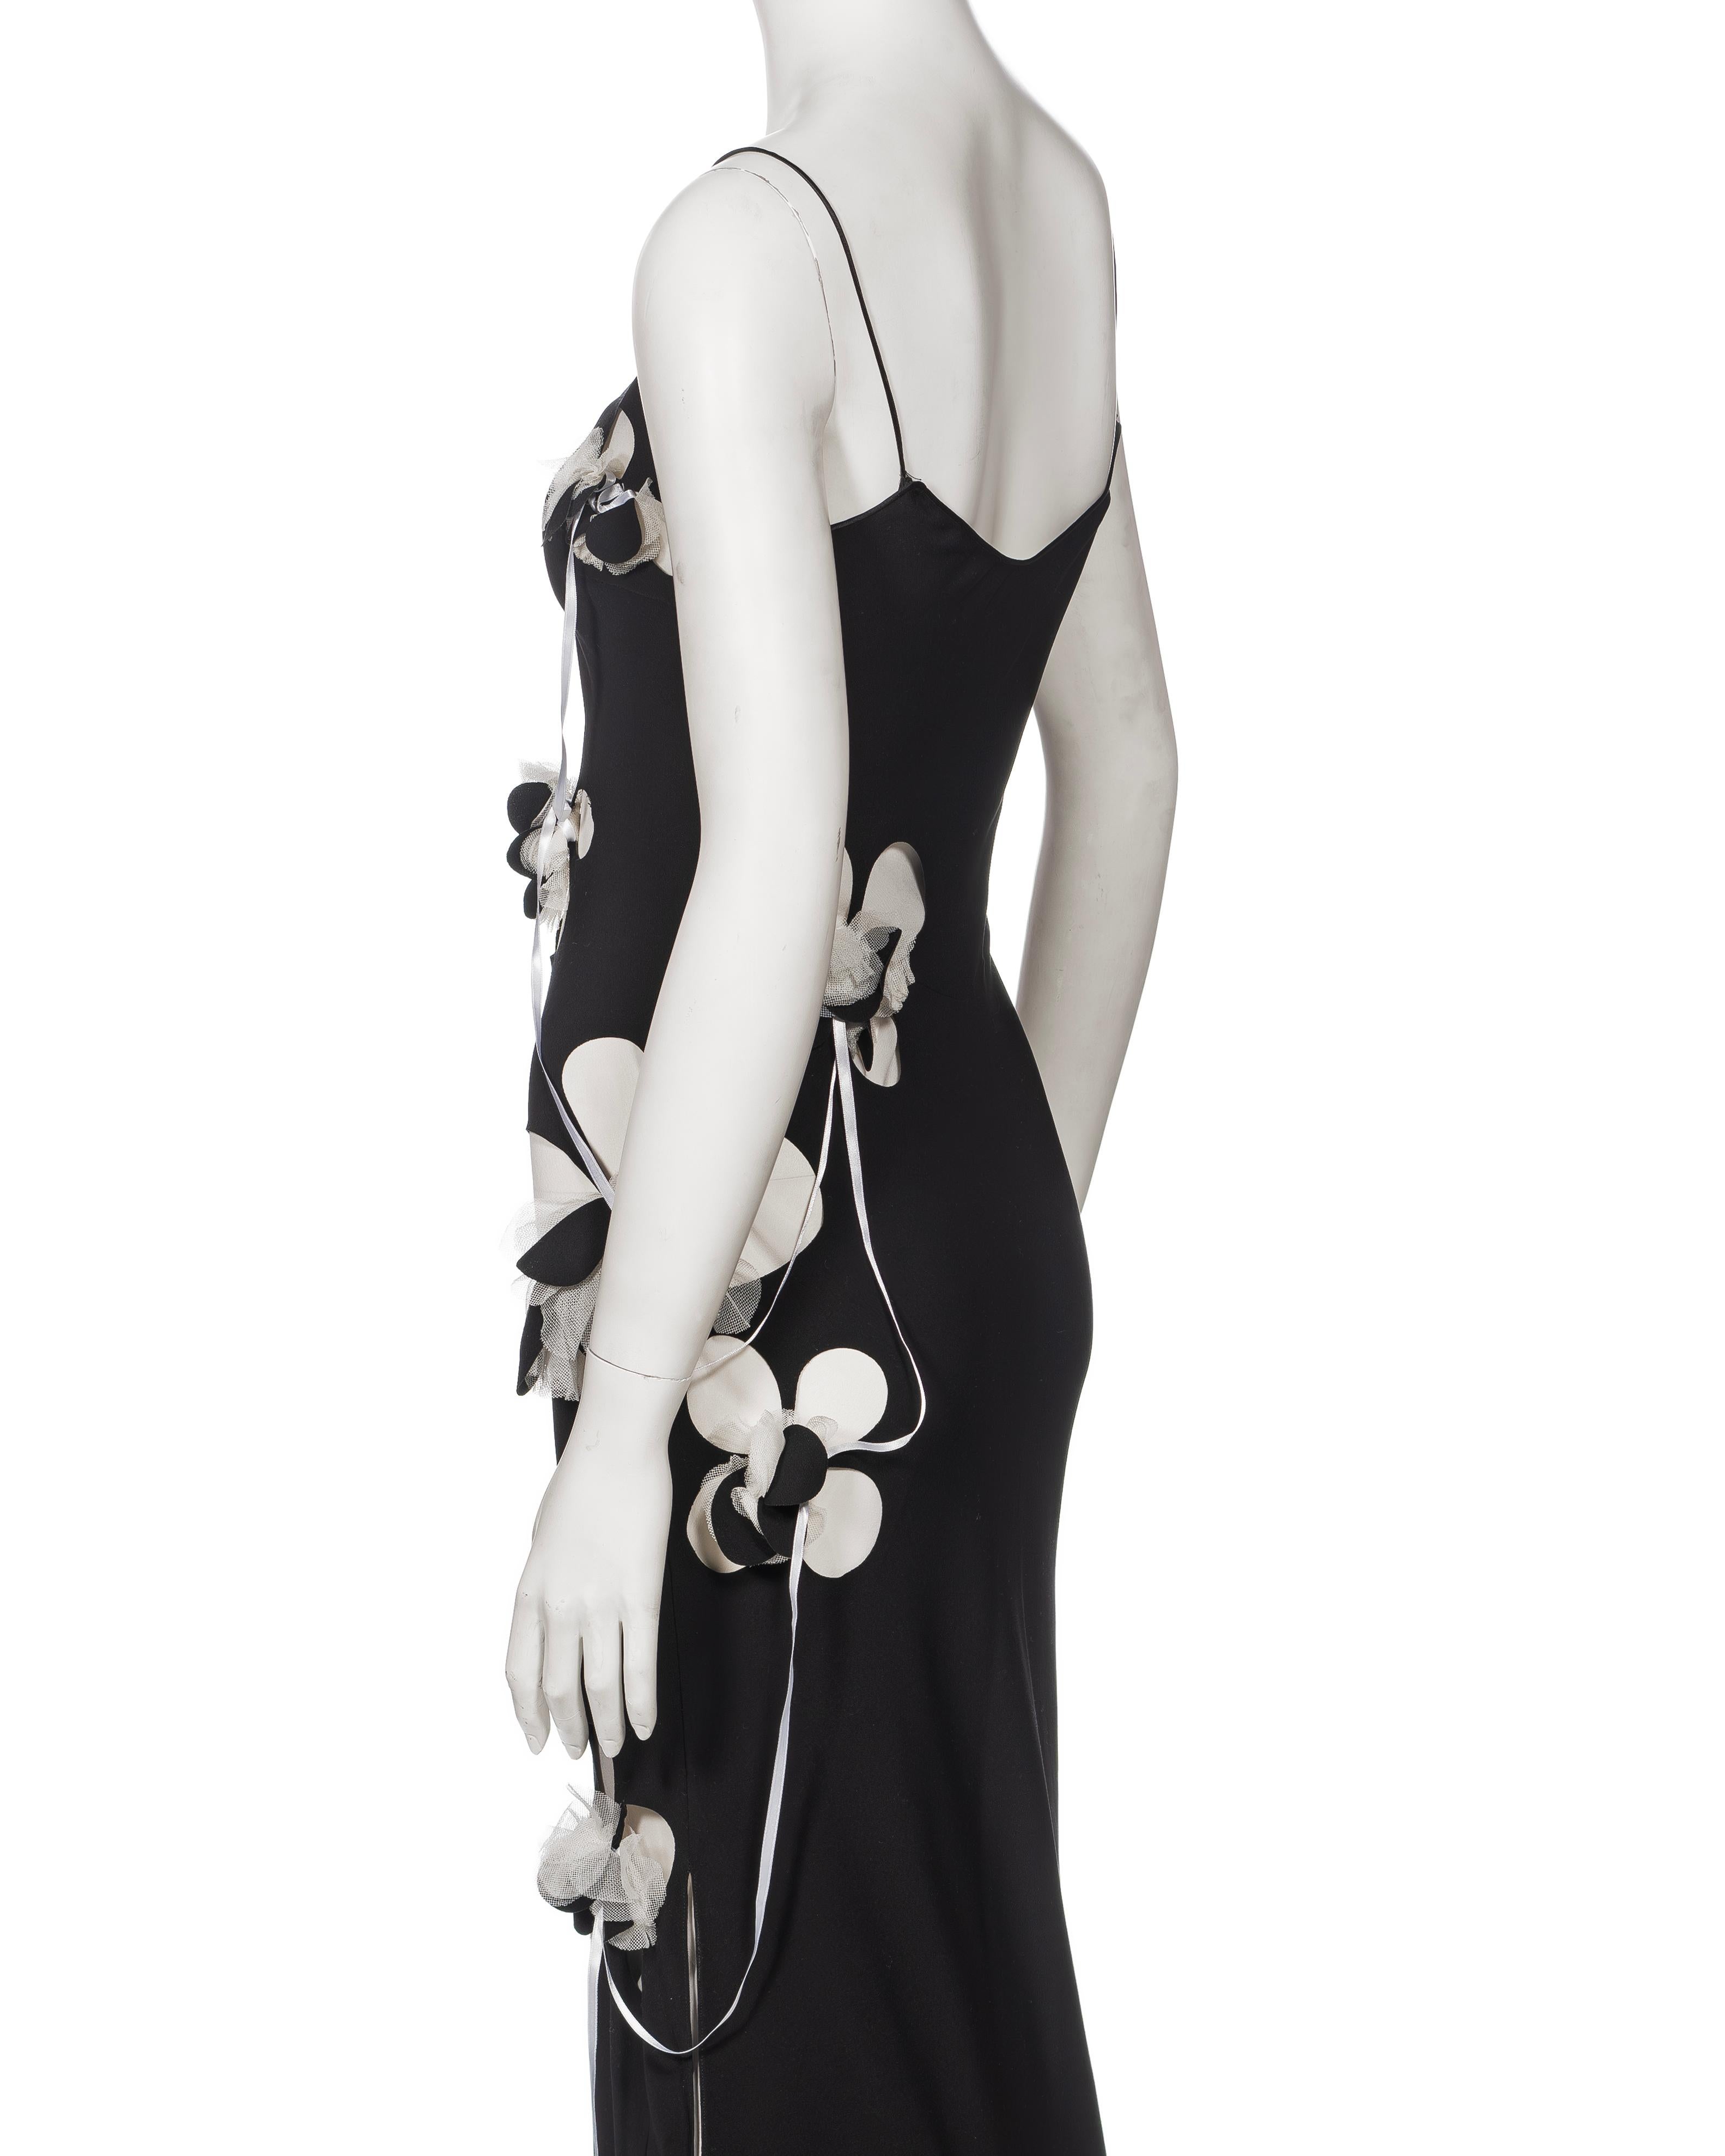 John Galliano Black Silk Slip Dress with Floral Appliqués and Ribbons, FW 2001 For Sale 4